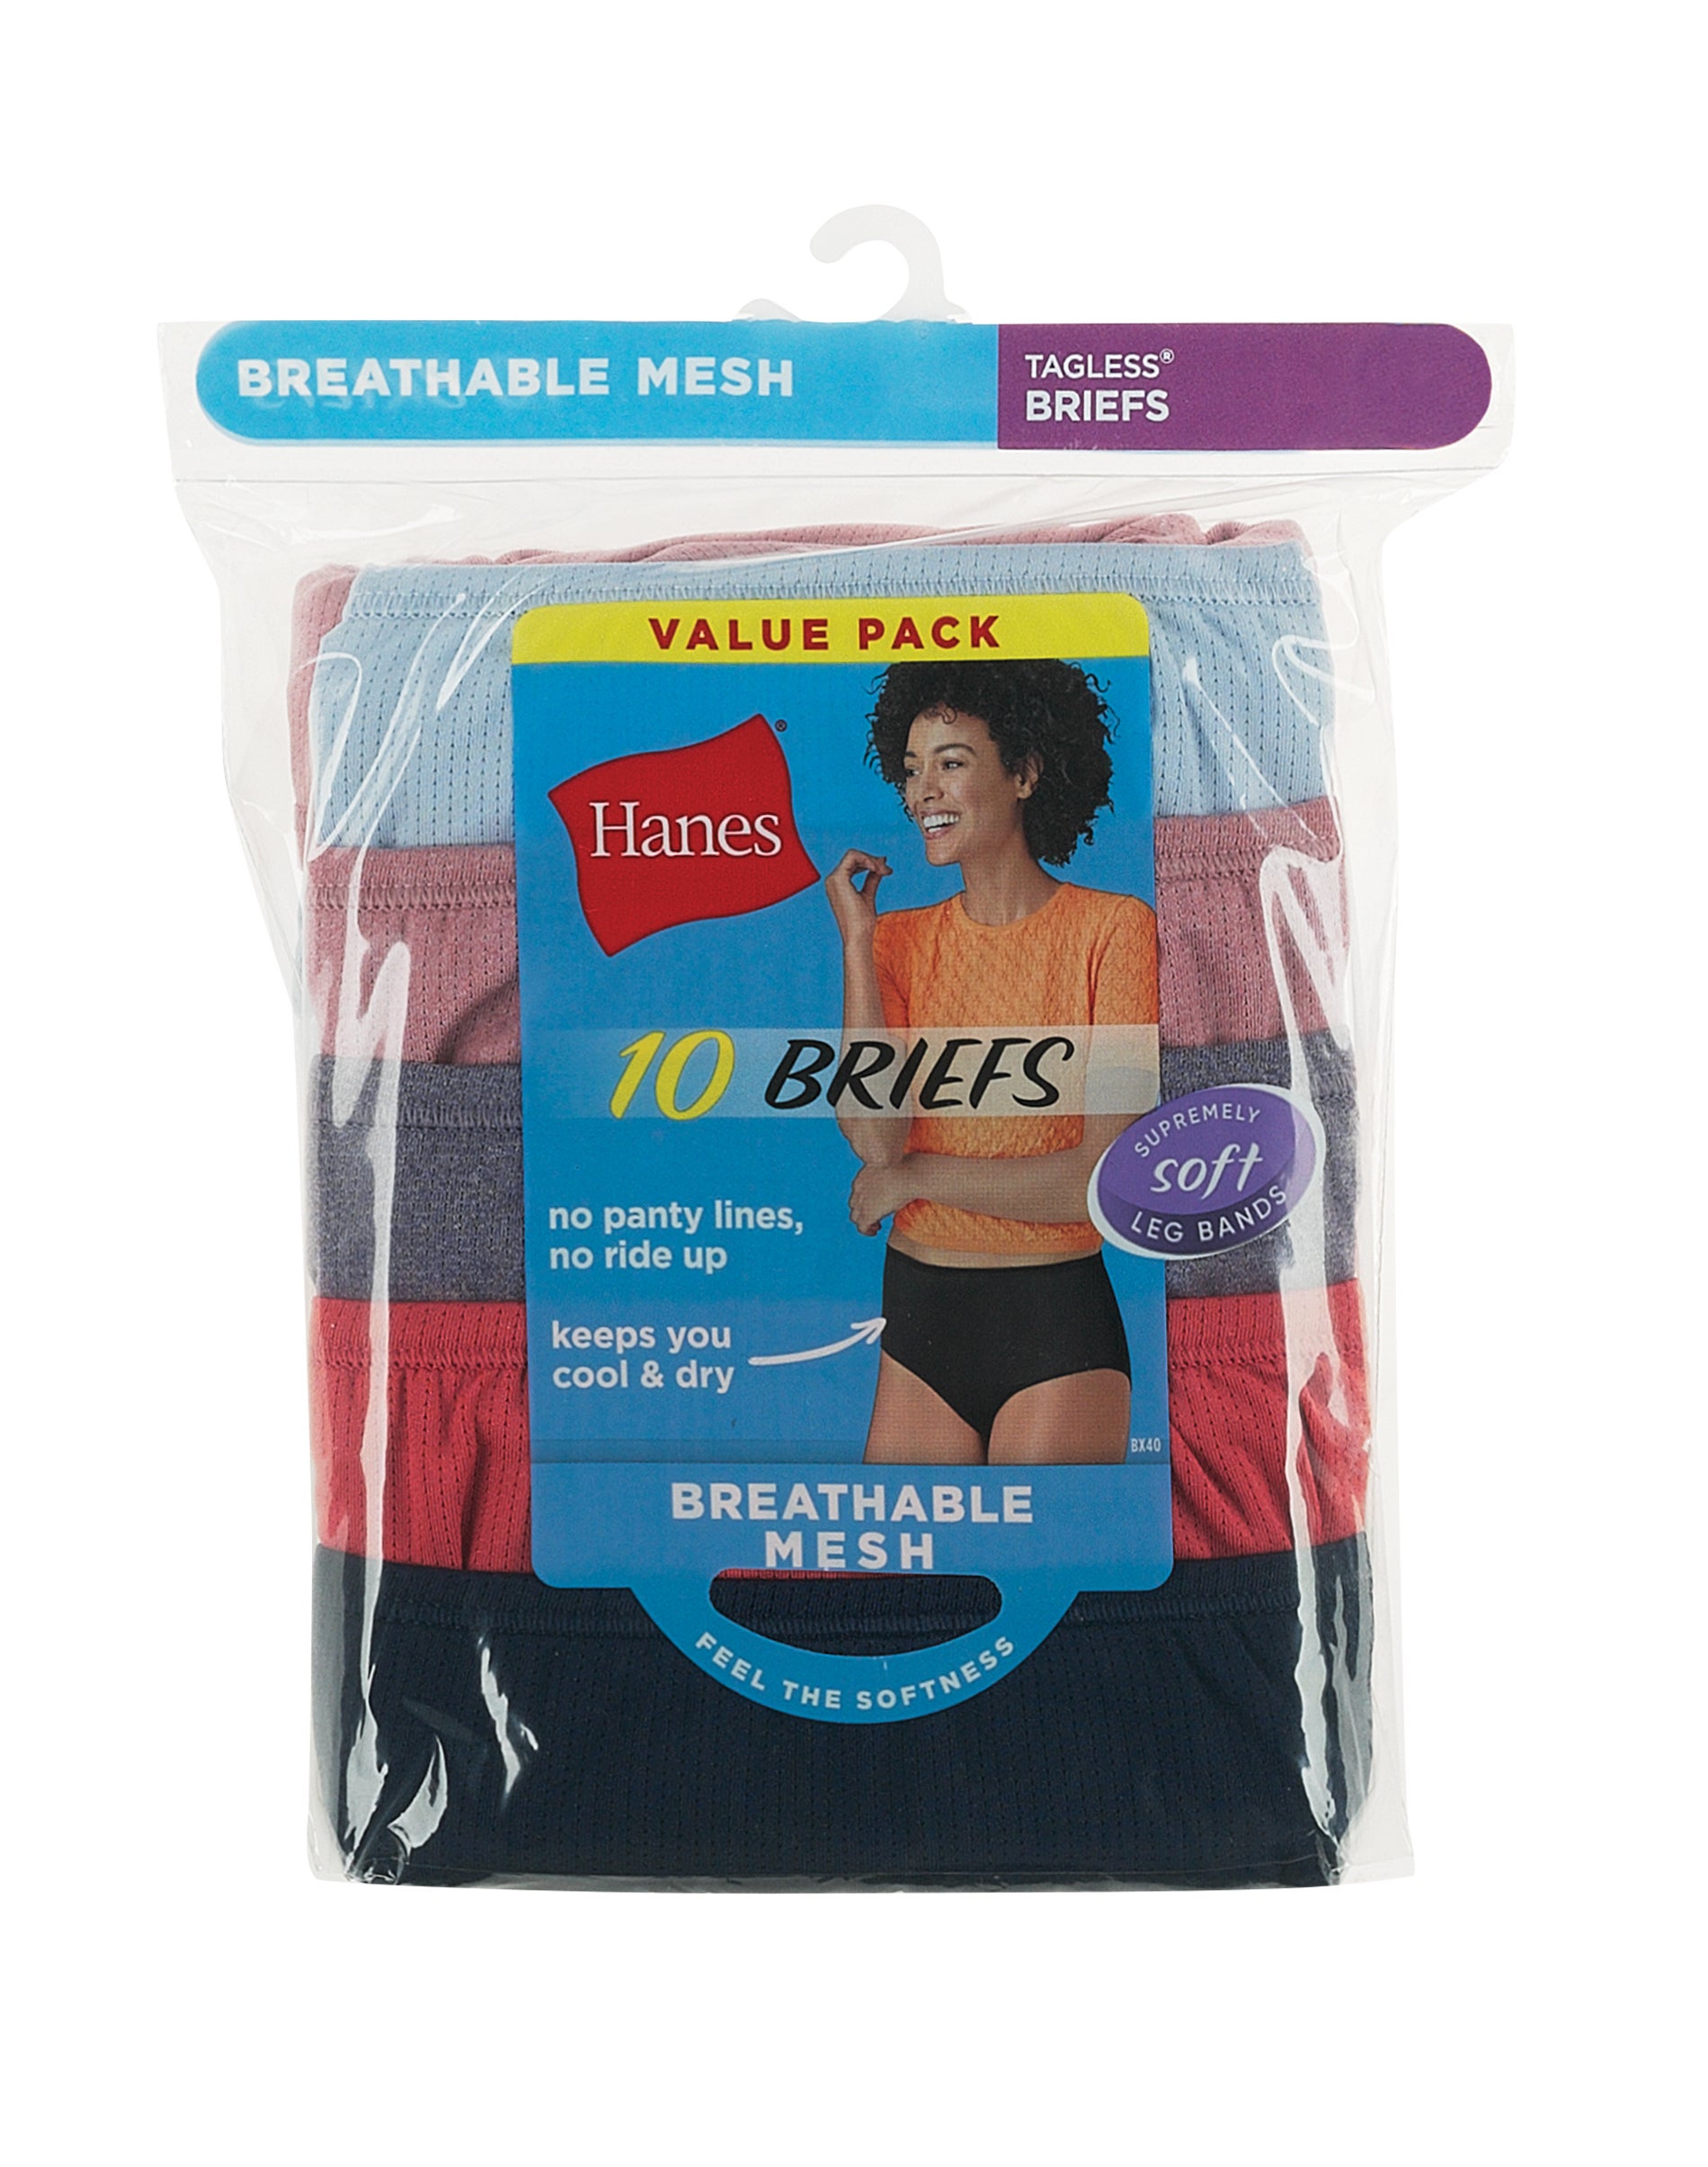 Hanes Breathable Mesh Women's Brief Underwear, 10-Pack Assorted 8 - image 4 of 10